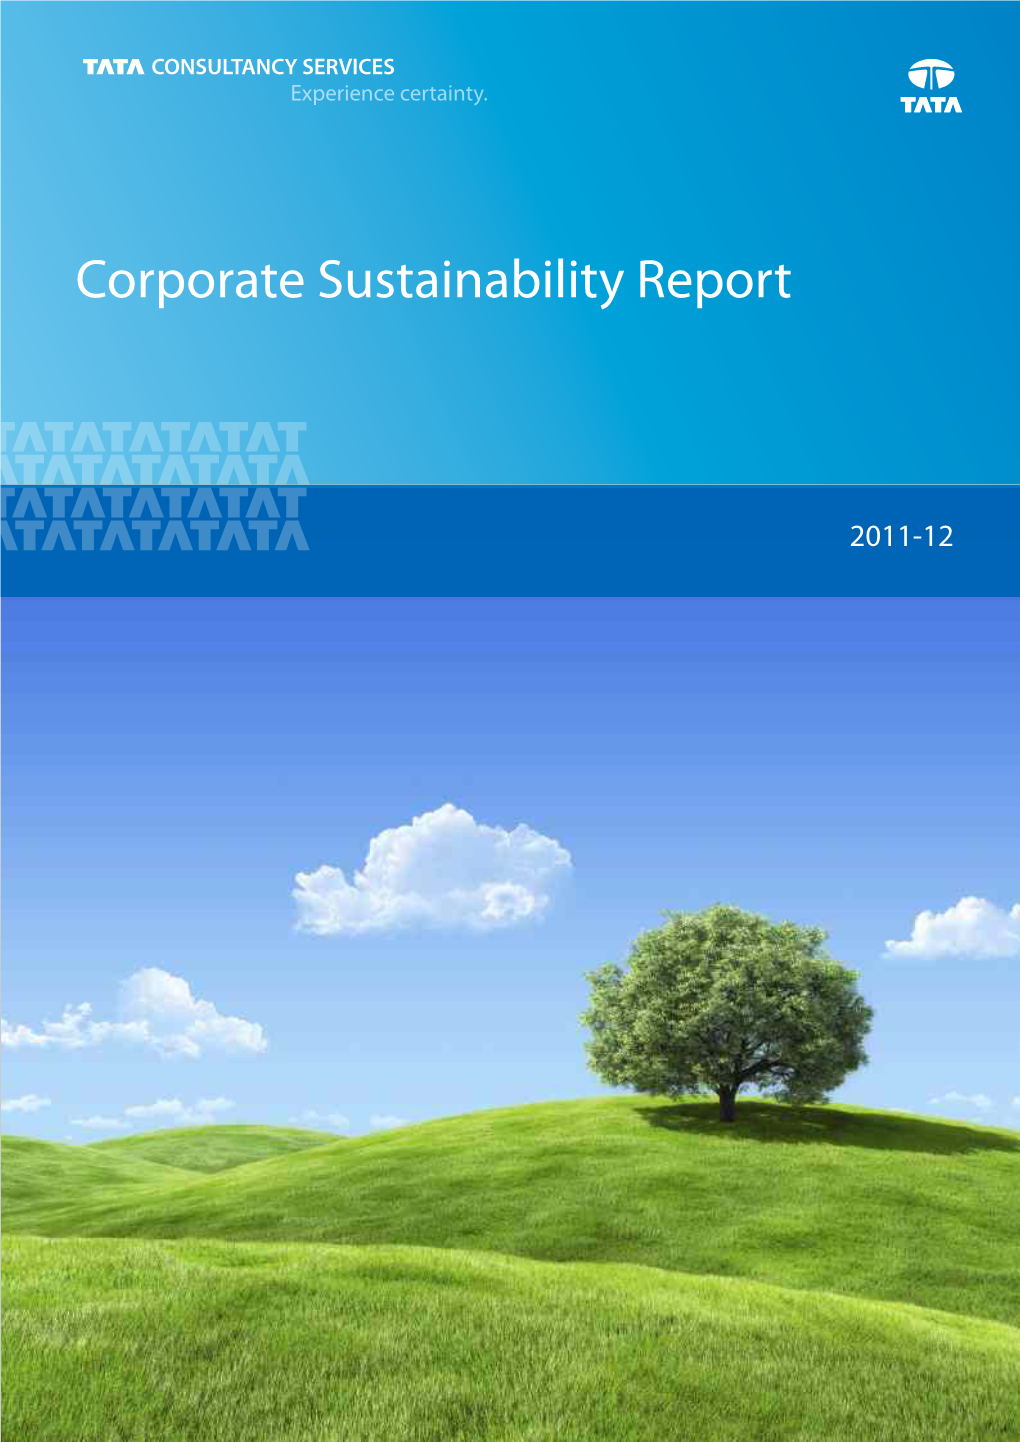 NEW GRI 2012 Sustainability Report.Cdr